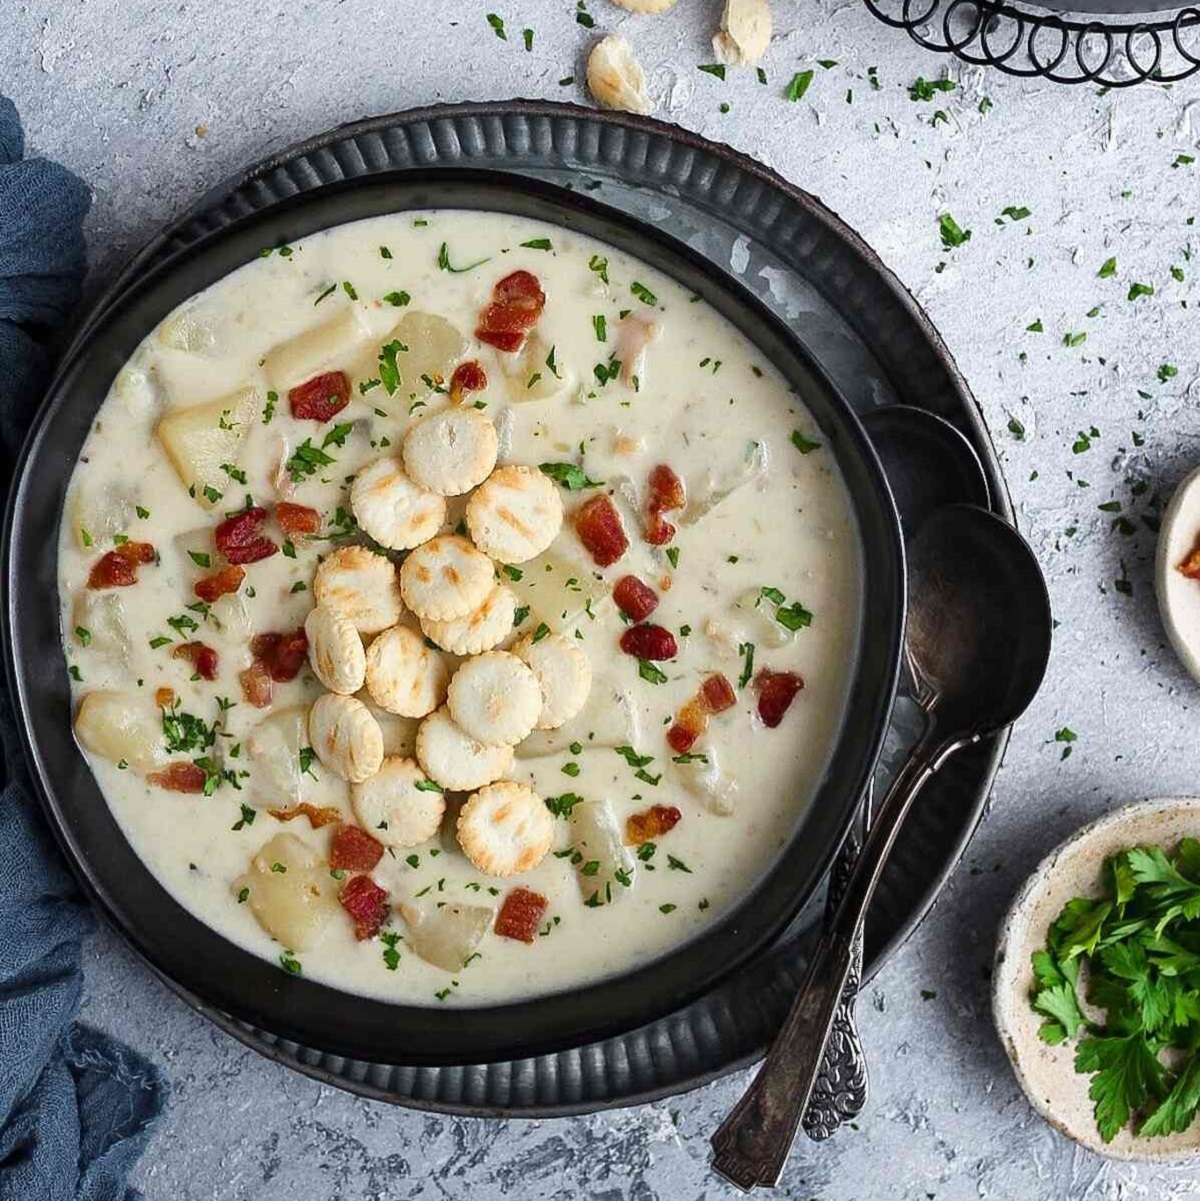 Instant Pot Clam Chowder (New England Style) - Aromatic Essence